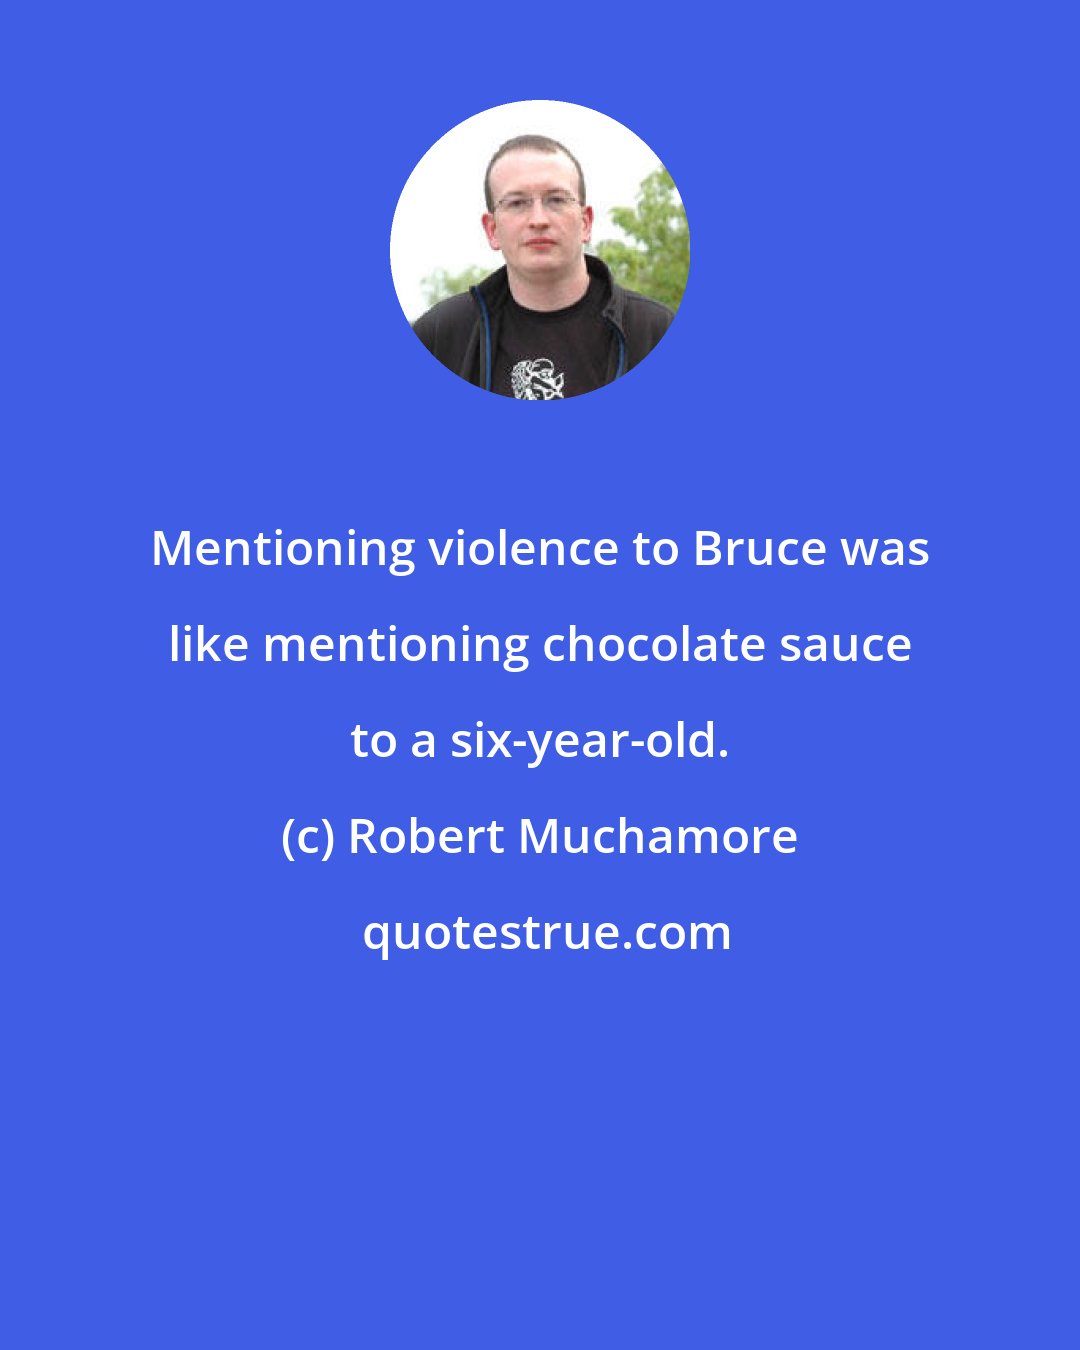 Robert Muchamore: Mentioning violence to Bruce was like mentioning chocolate sauce to a six-year-old.